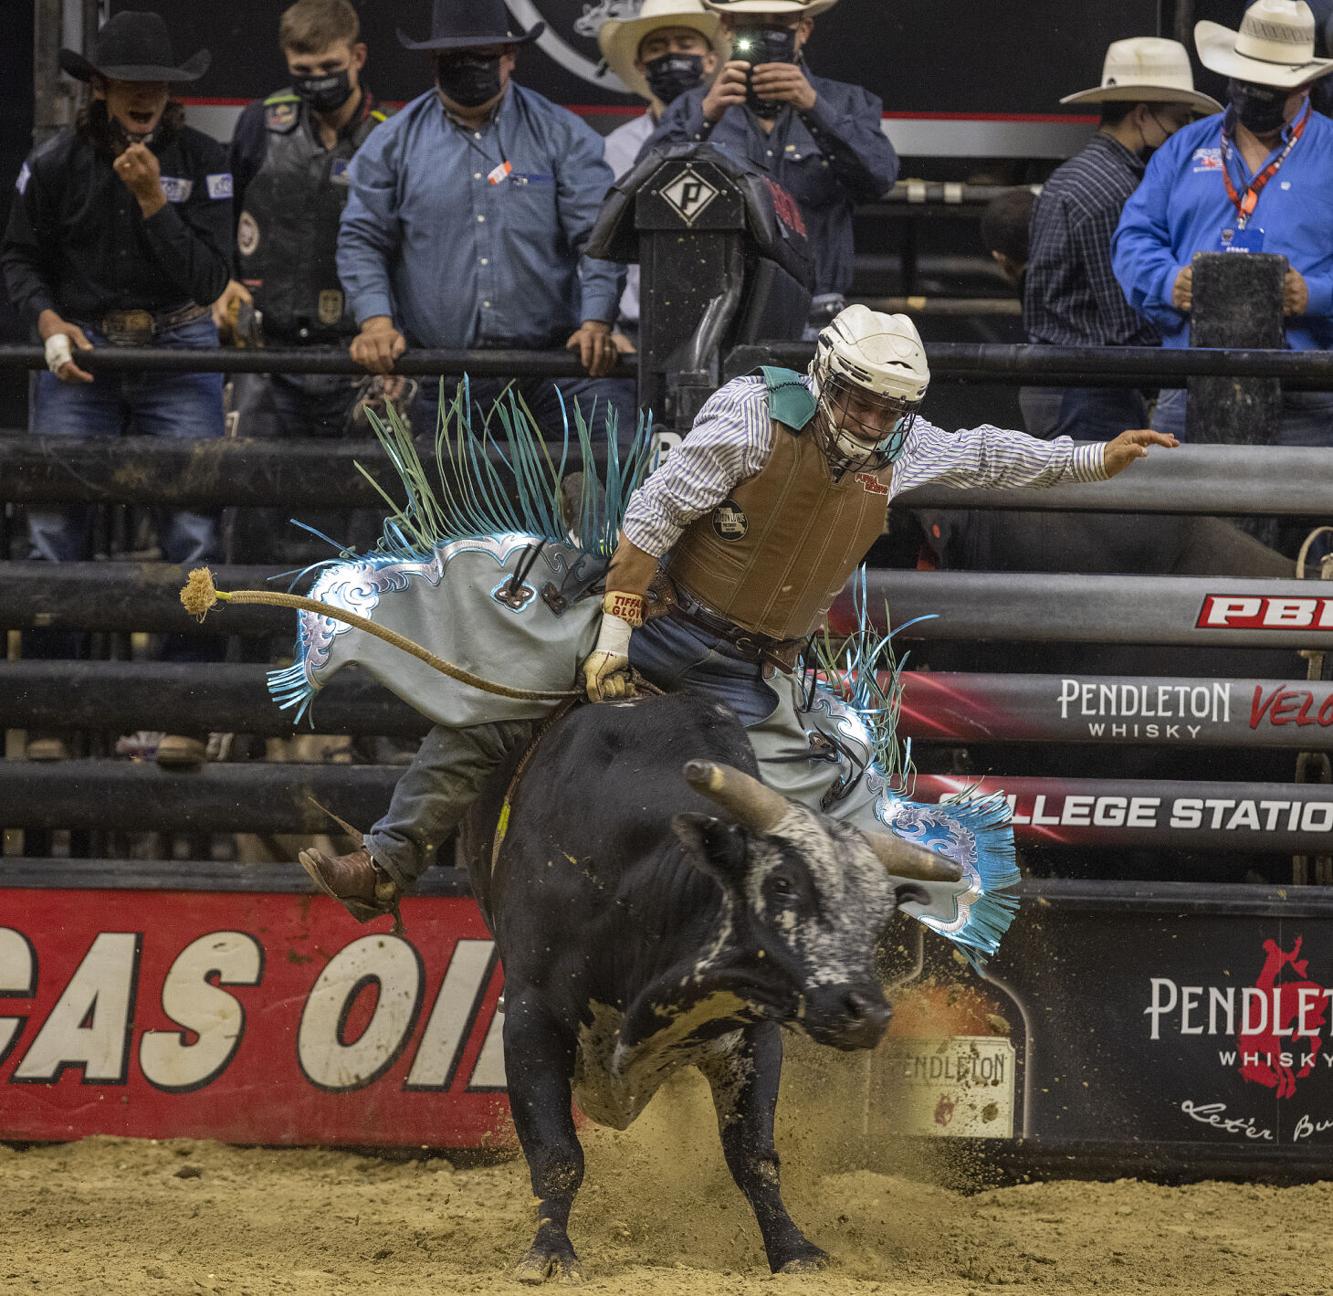 Gallery PBA Aggieland Classic bull riding at Reed Arena Rodeo